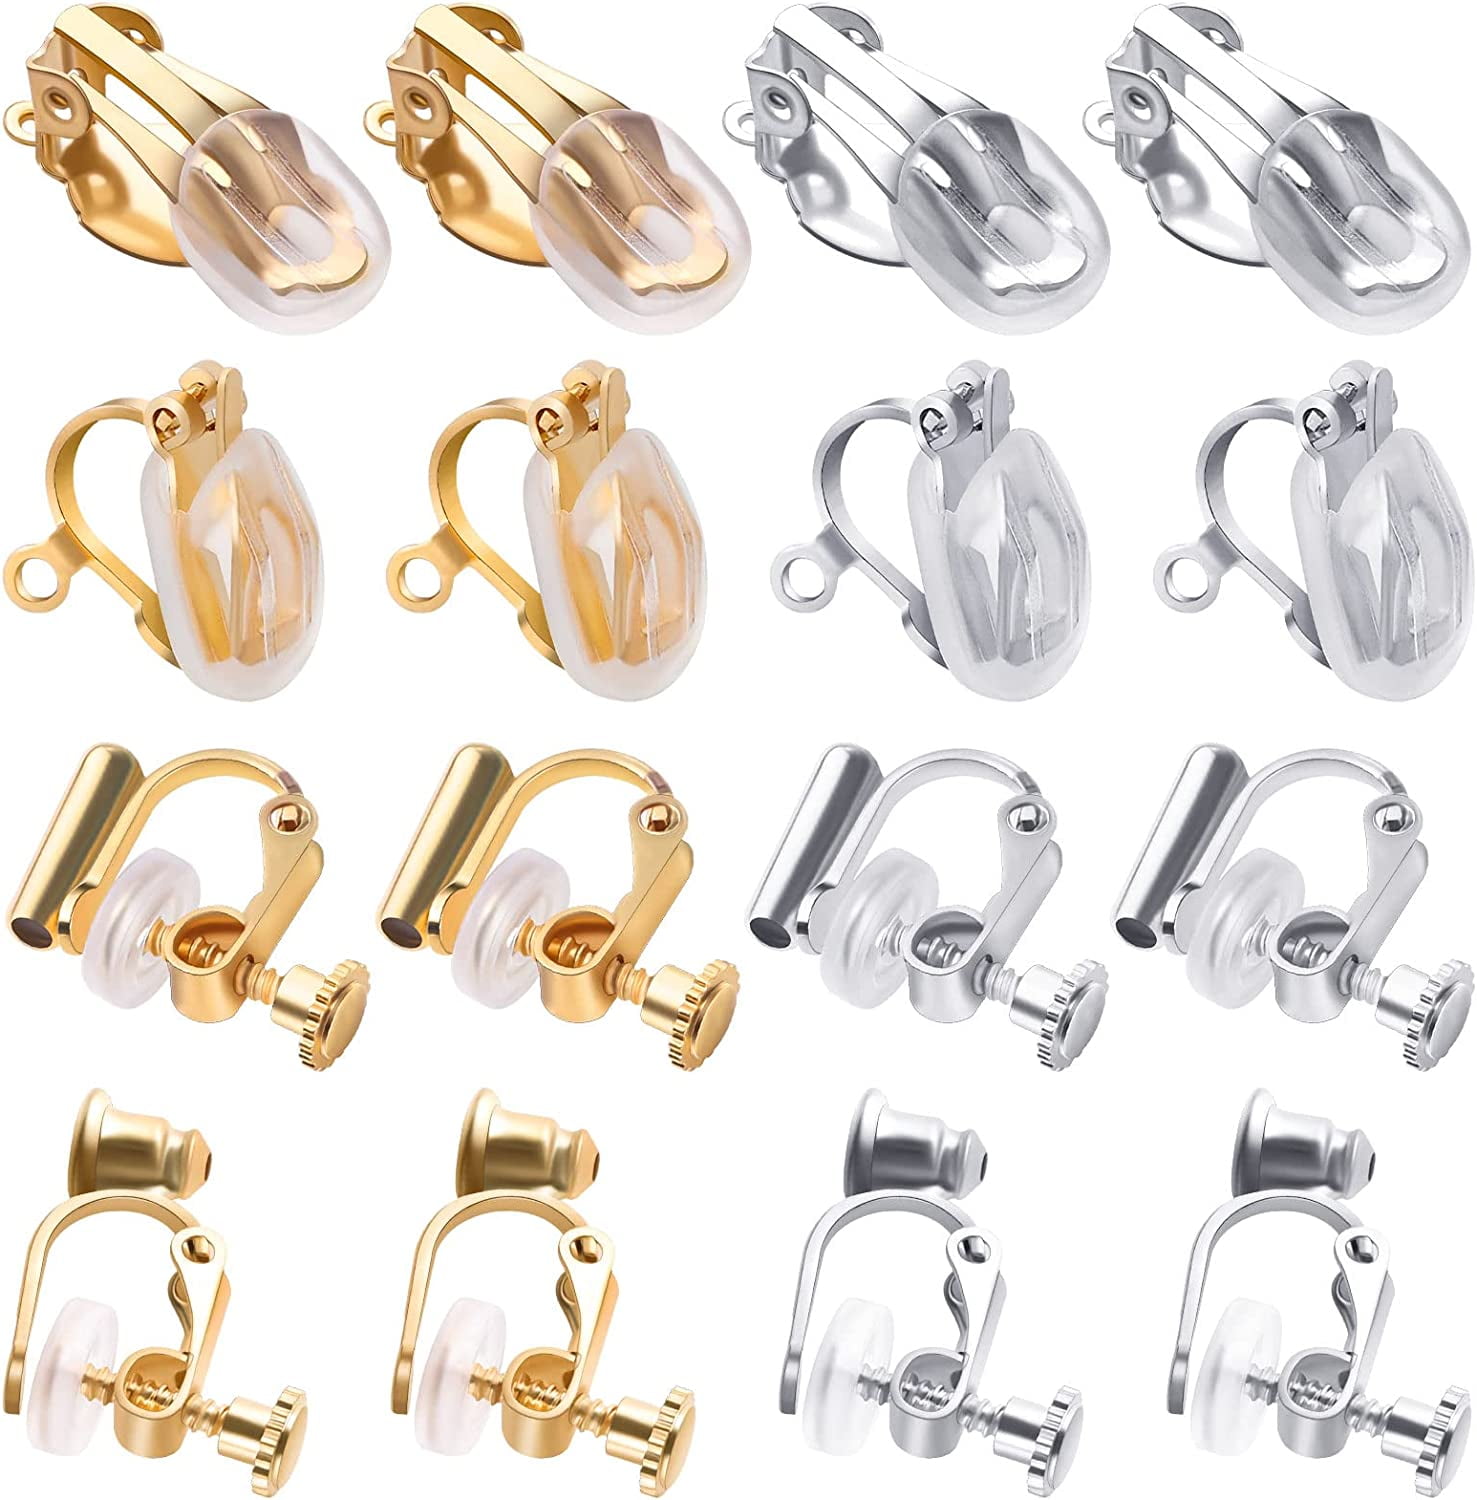 40pcs Clip-On Earring Converter, Brass Non Pierced Earring Clips with Vertical Loops and 40pcs Comfort TPE Plastic Pads for DIY Earring Jewelry Making